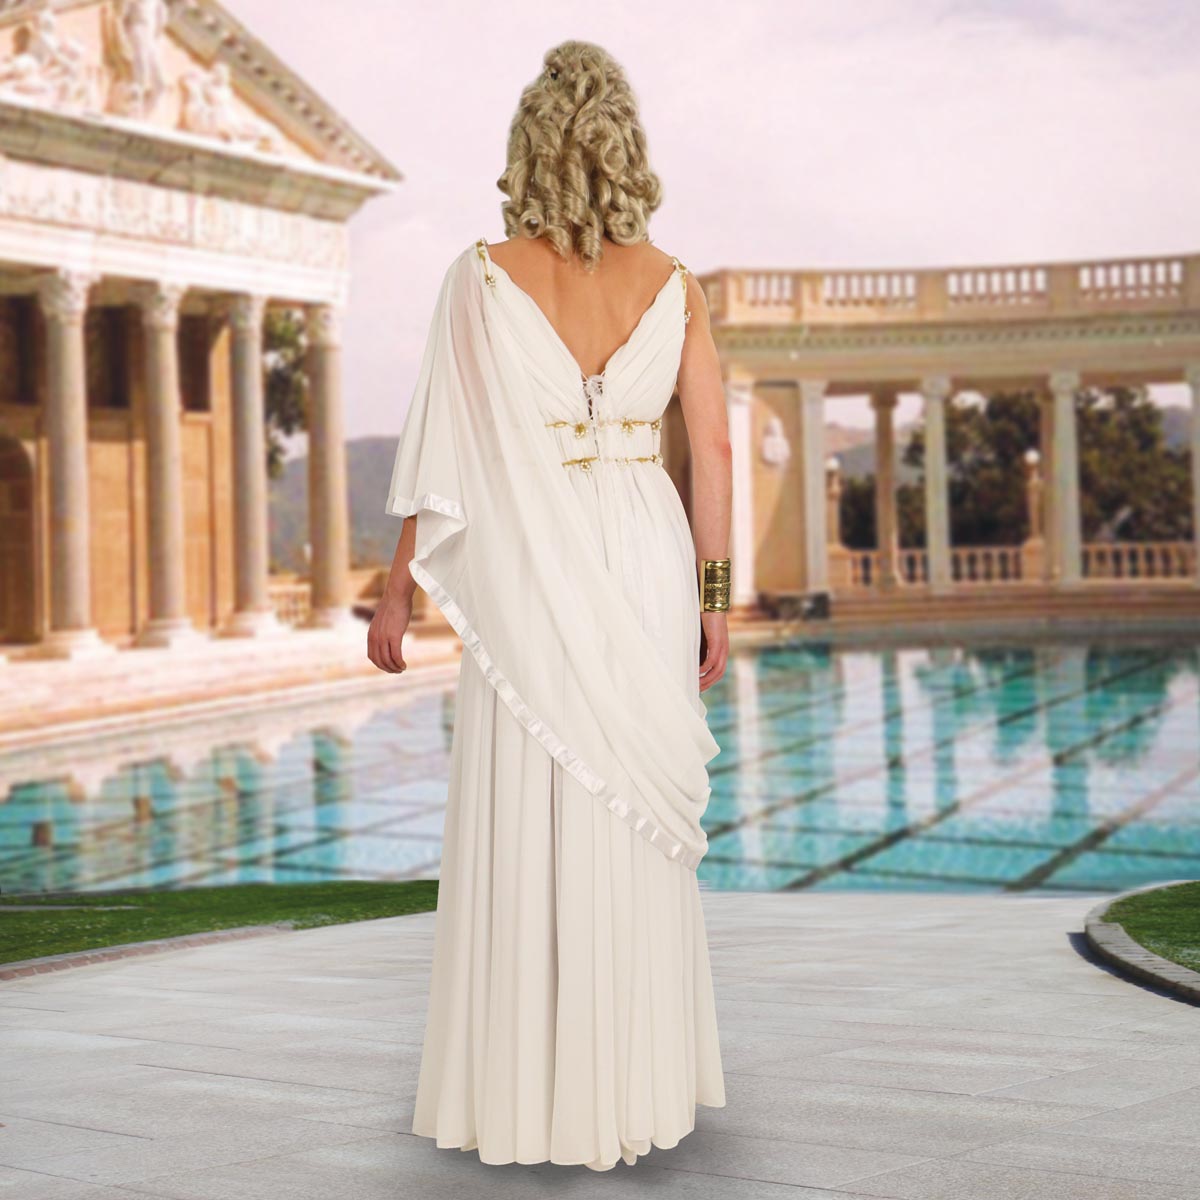 Helen of Troy Gown, Size XL